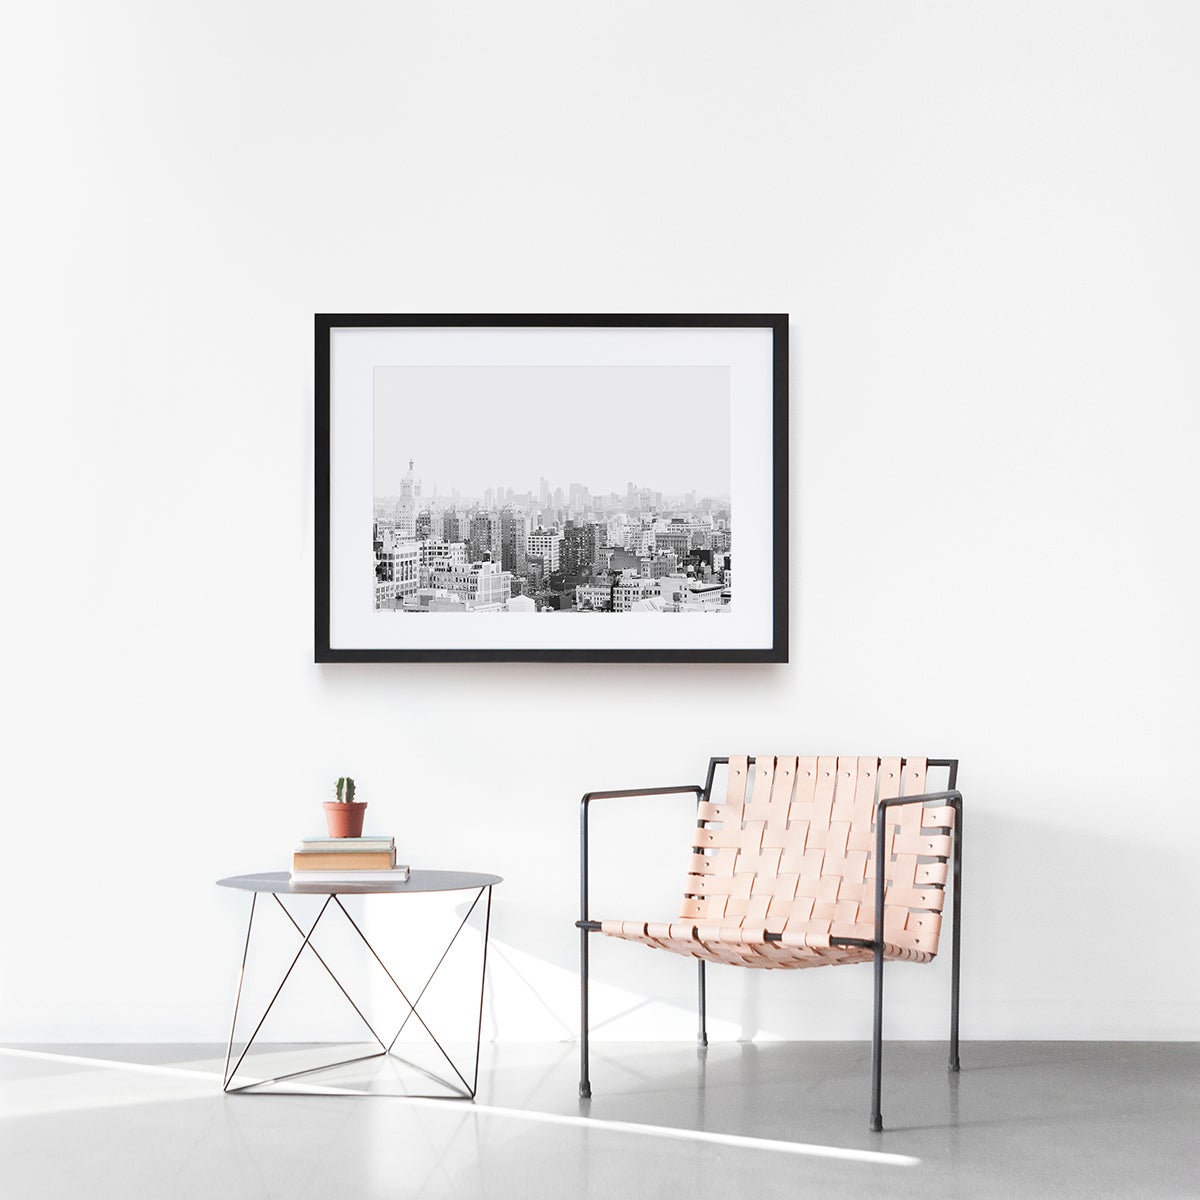 Minimalist interior design scene with chair, sidetable, and frame